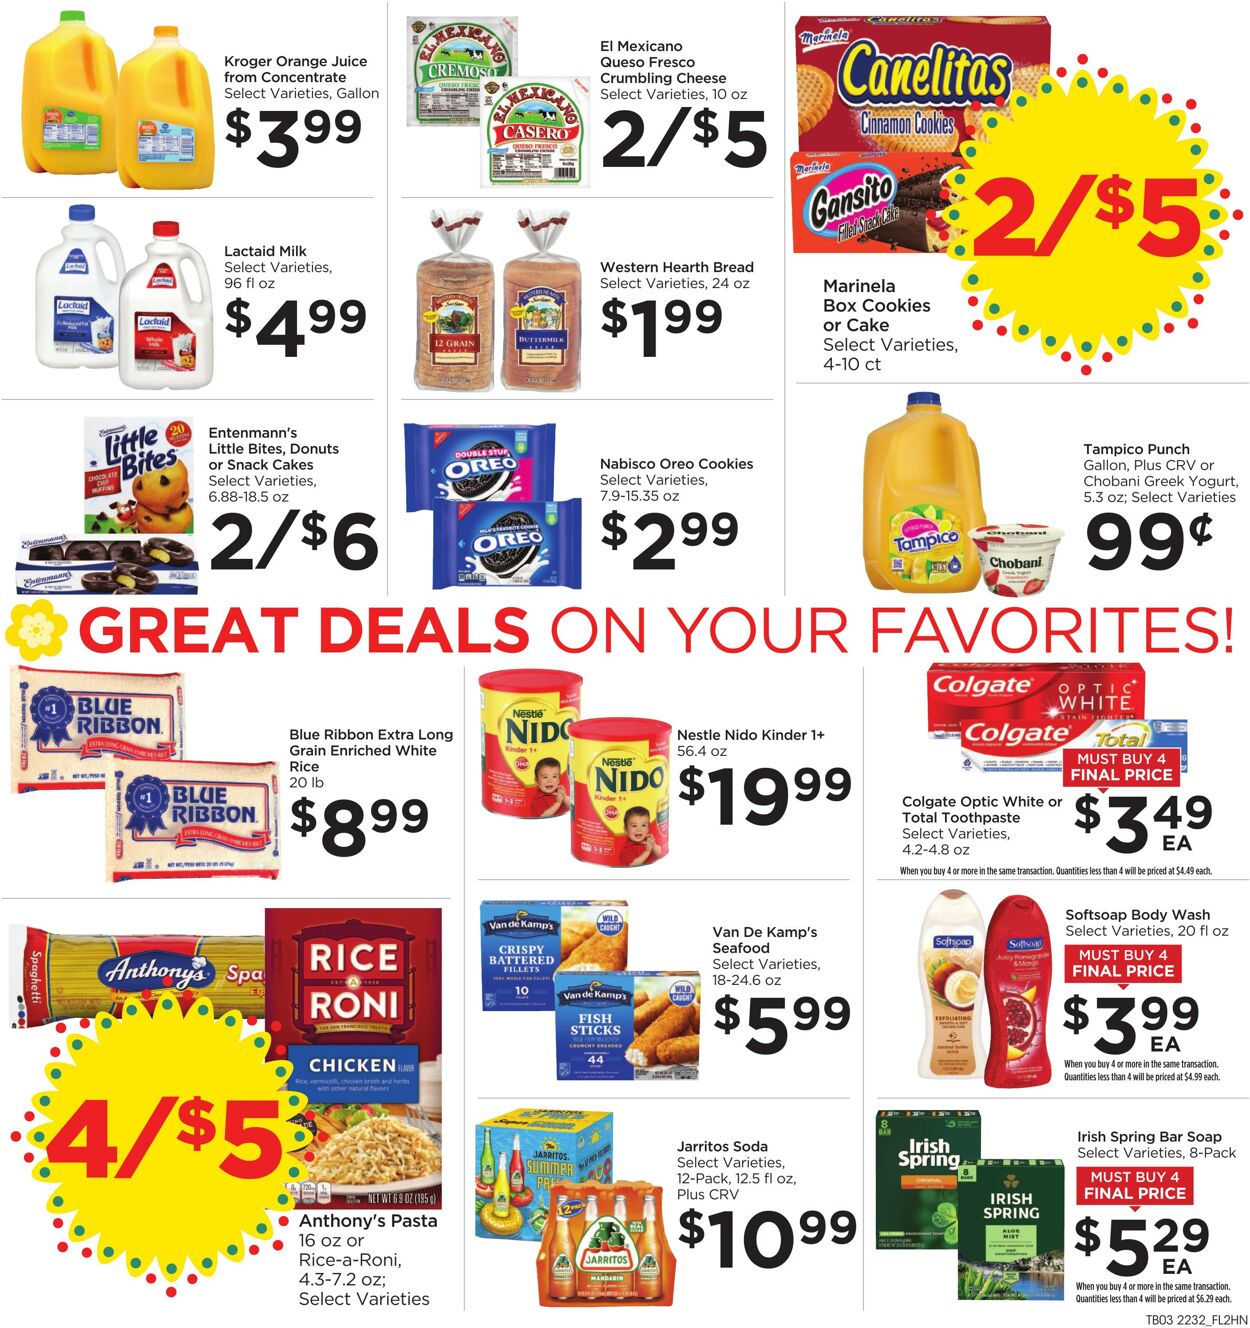 Weekly ad Foods Co 09/07/2022 - 09/13/2022